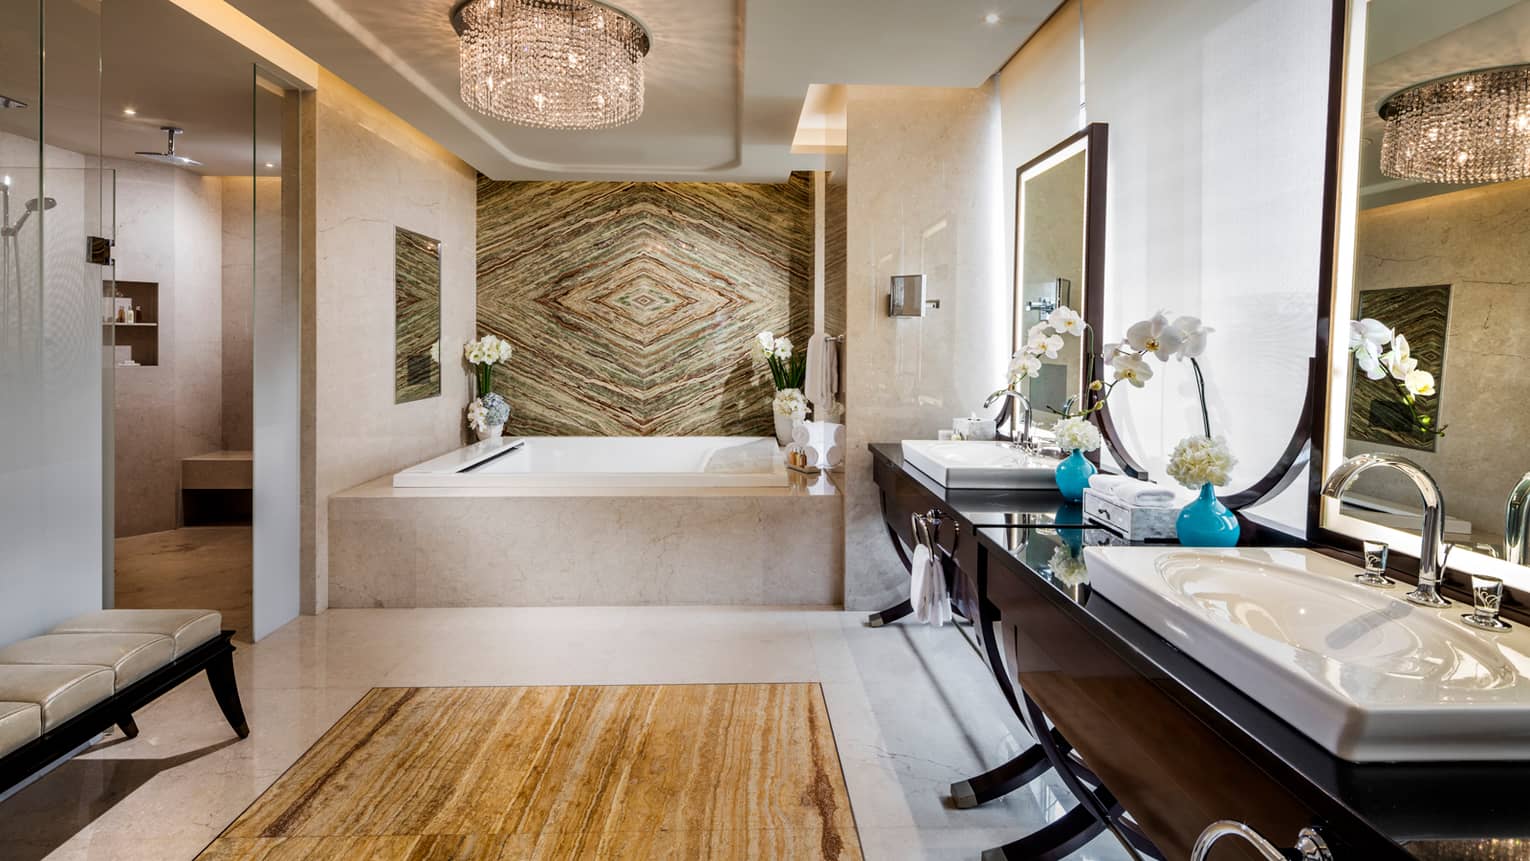 Large bathroom with square marble tub, decorative marble wall, wood vanity with double sinks